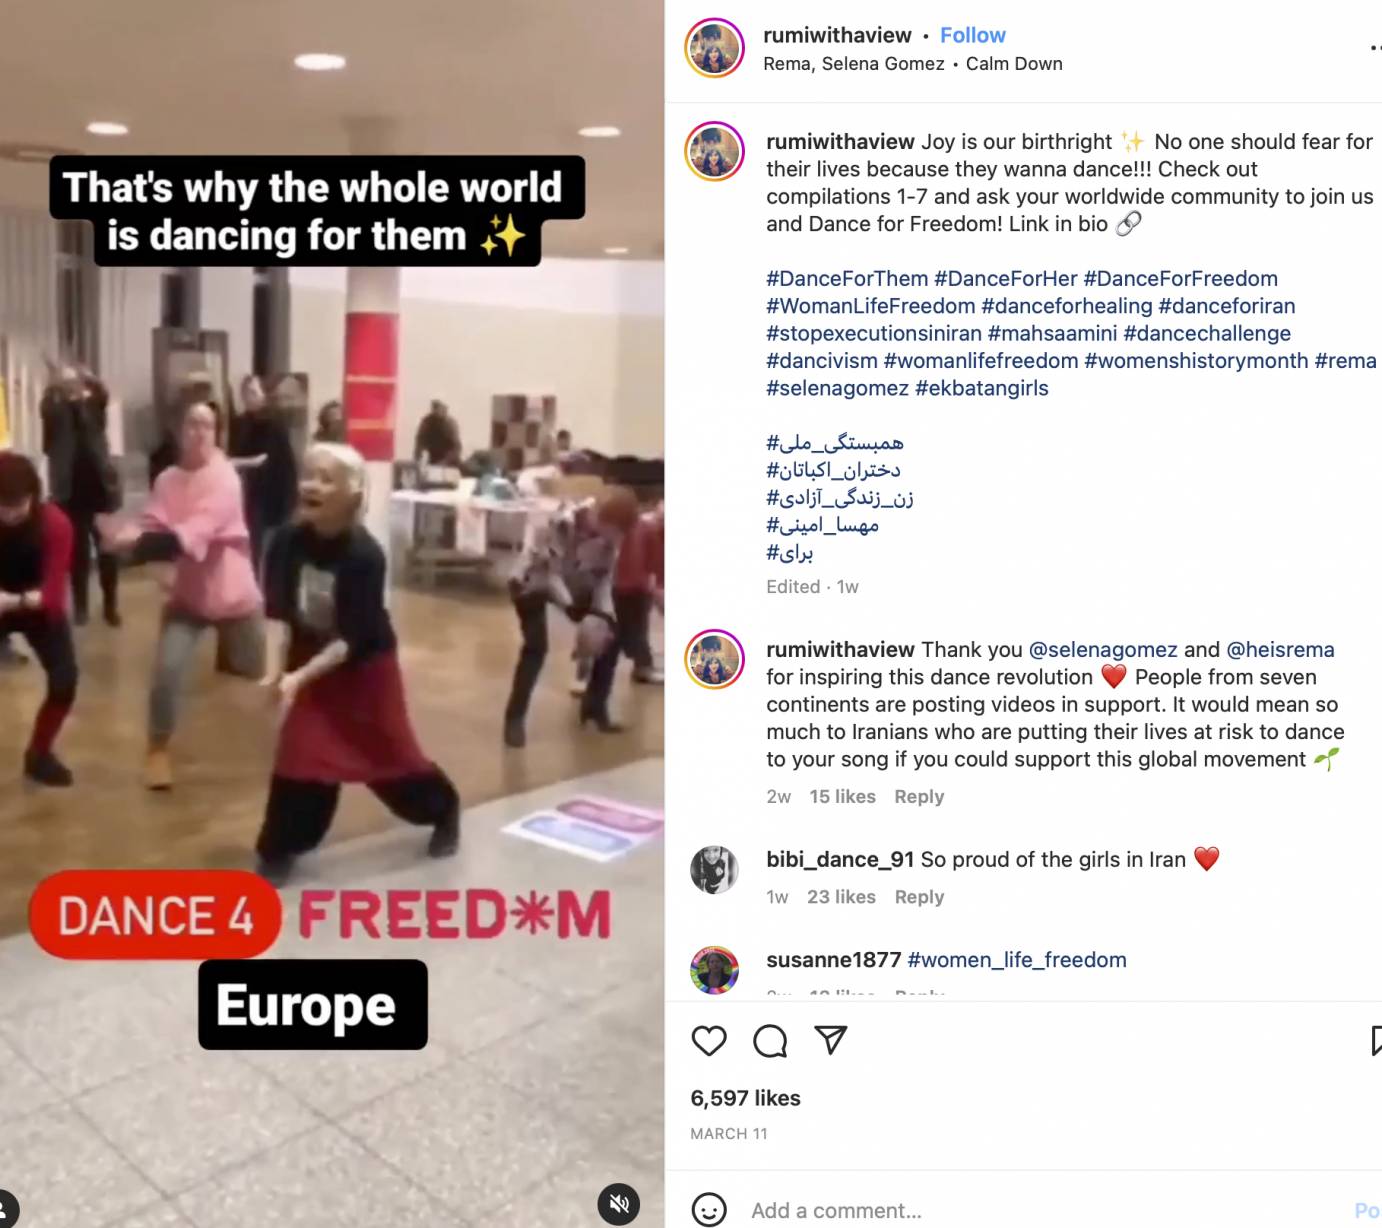 people in Europe in what looks like a dance studio, dancing to support the dance for freedom project